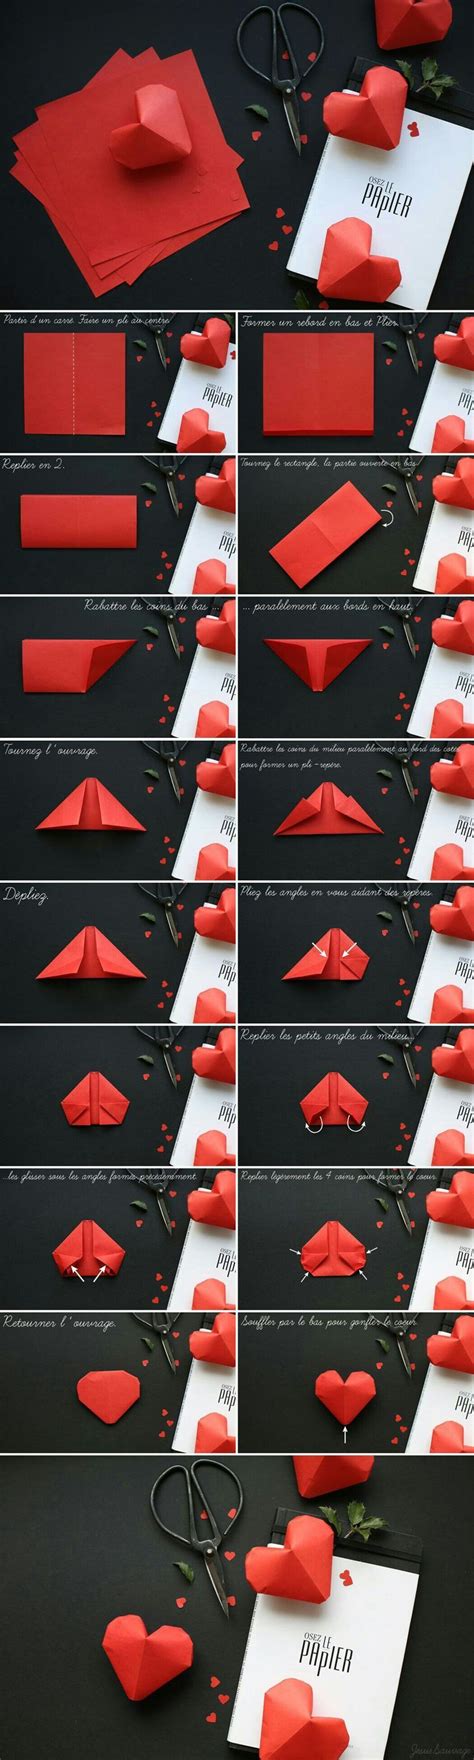 Image Result For Origami Puffy Heart Instructions Useful Origami